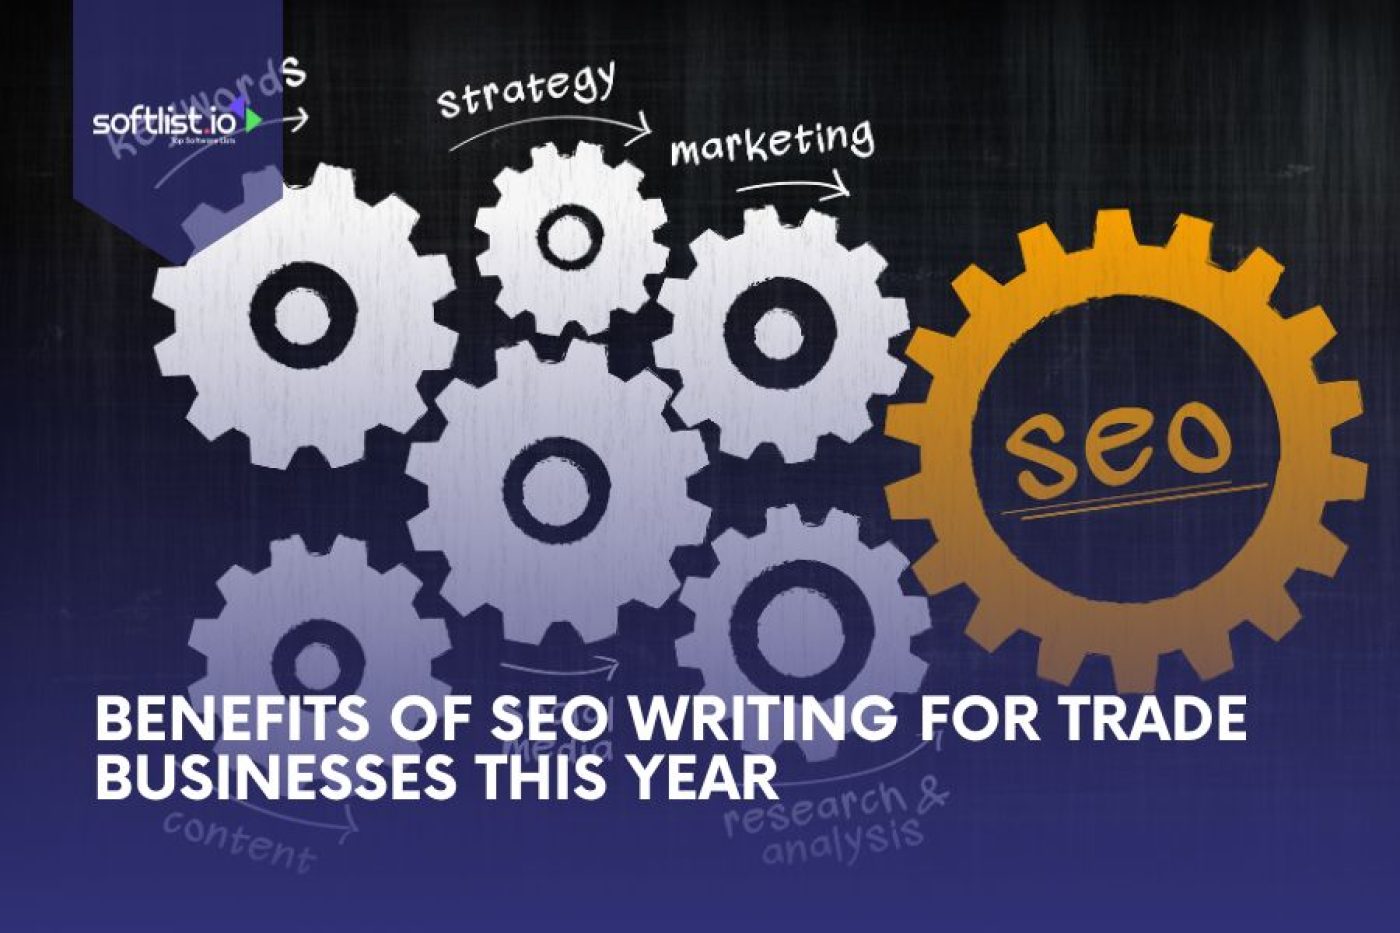 Benefits of SEO Writing for Trade Businesses This Year